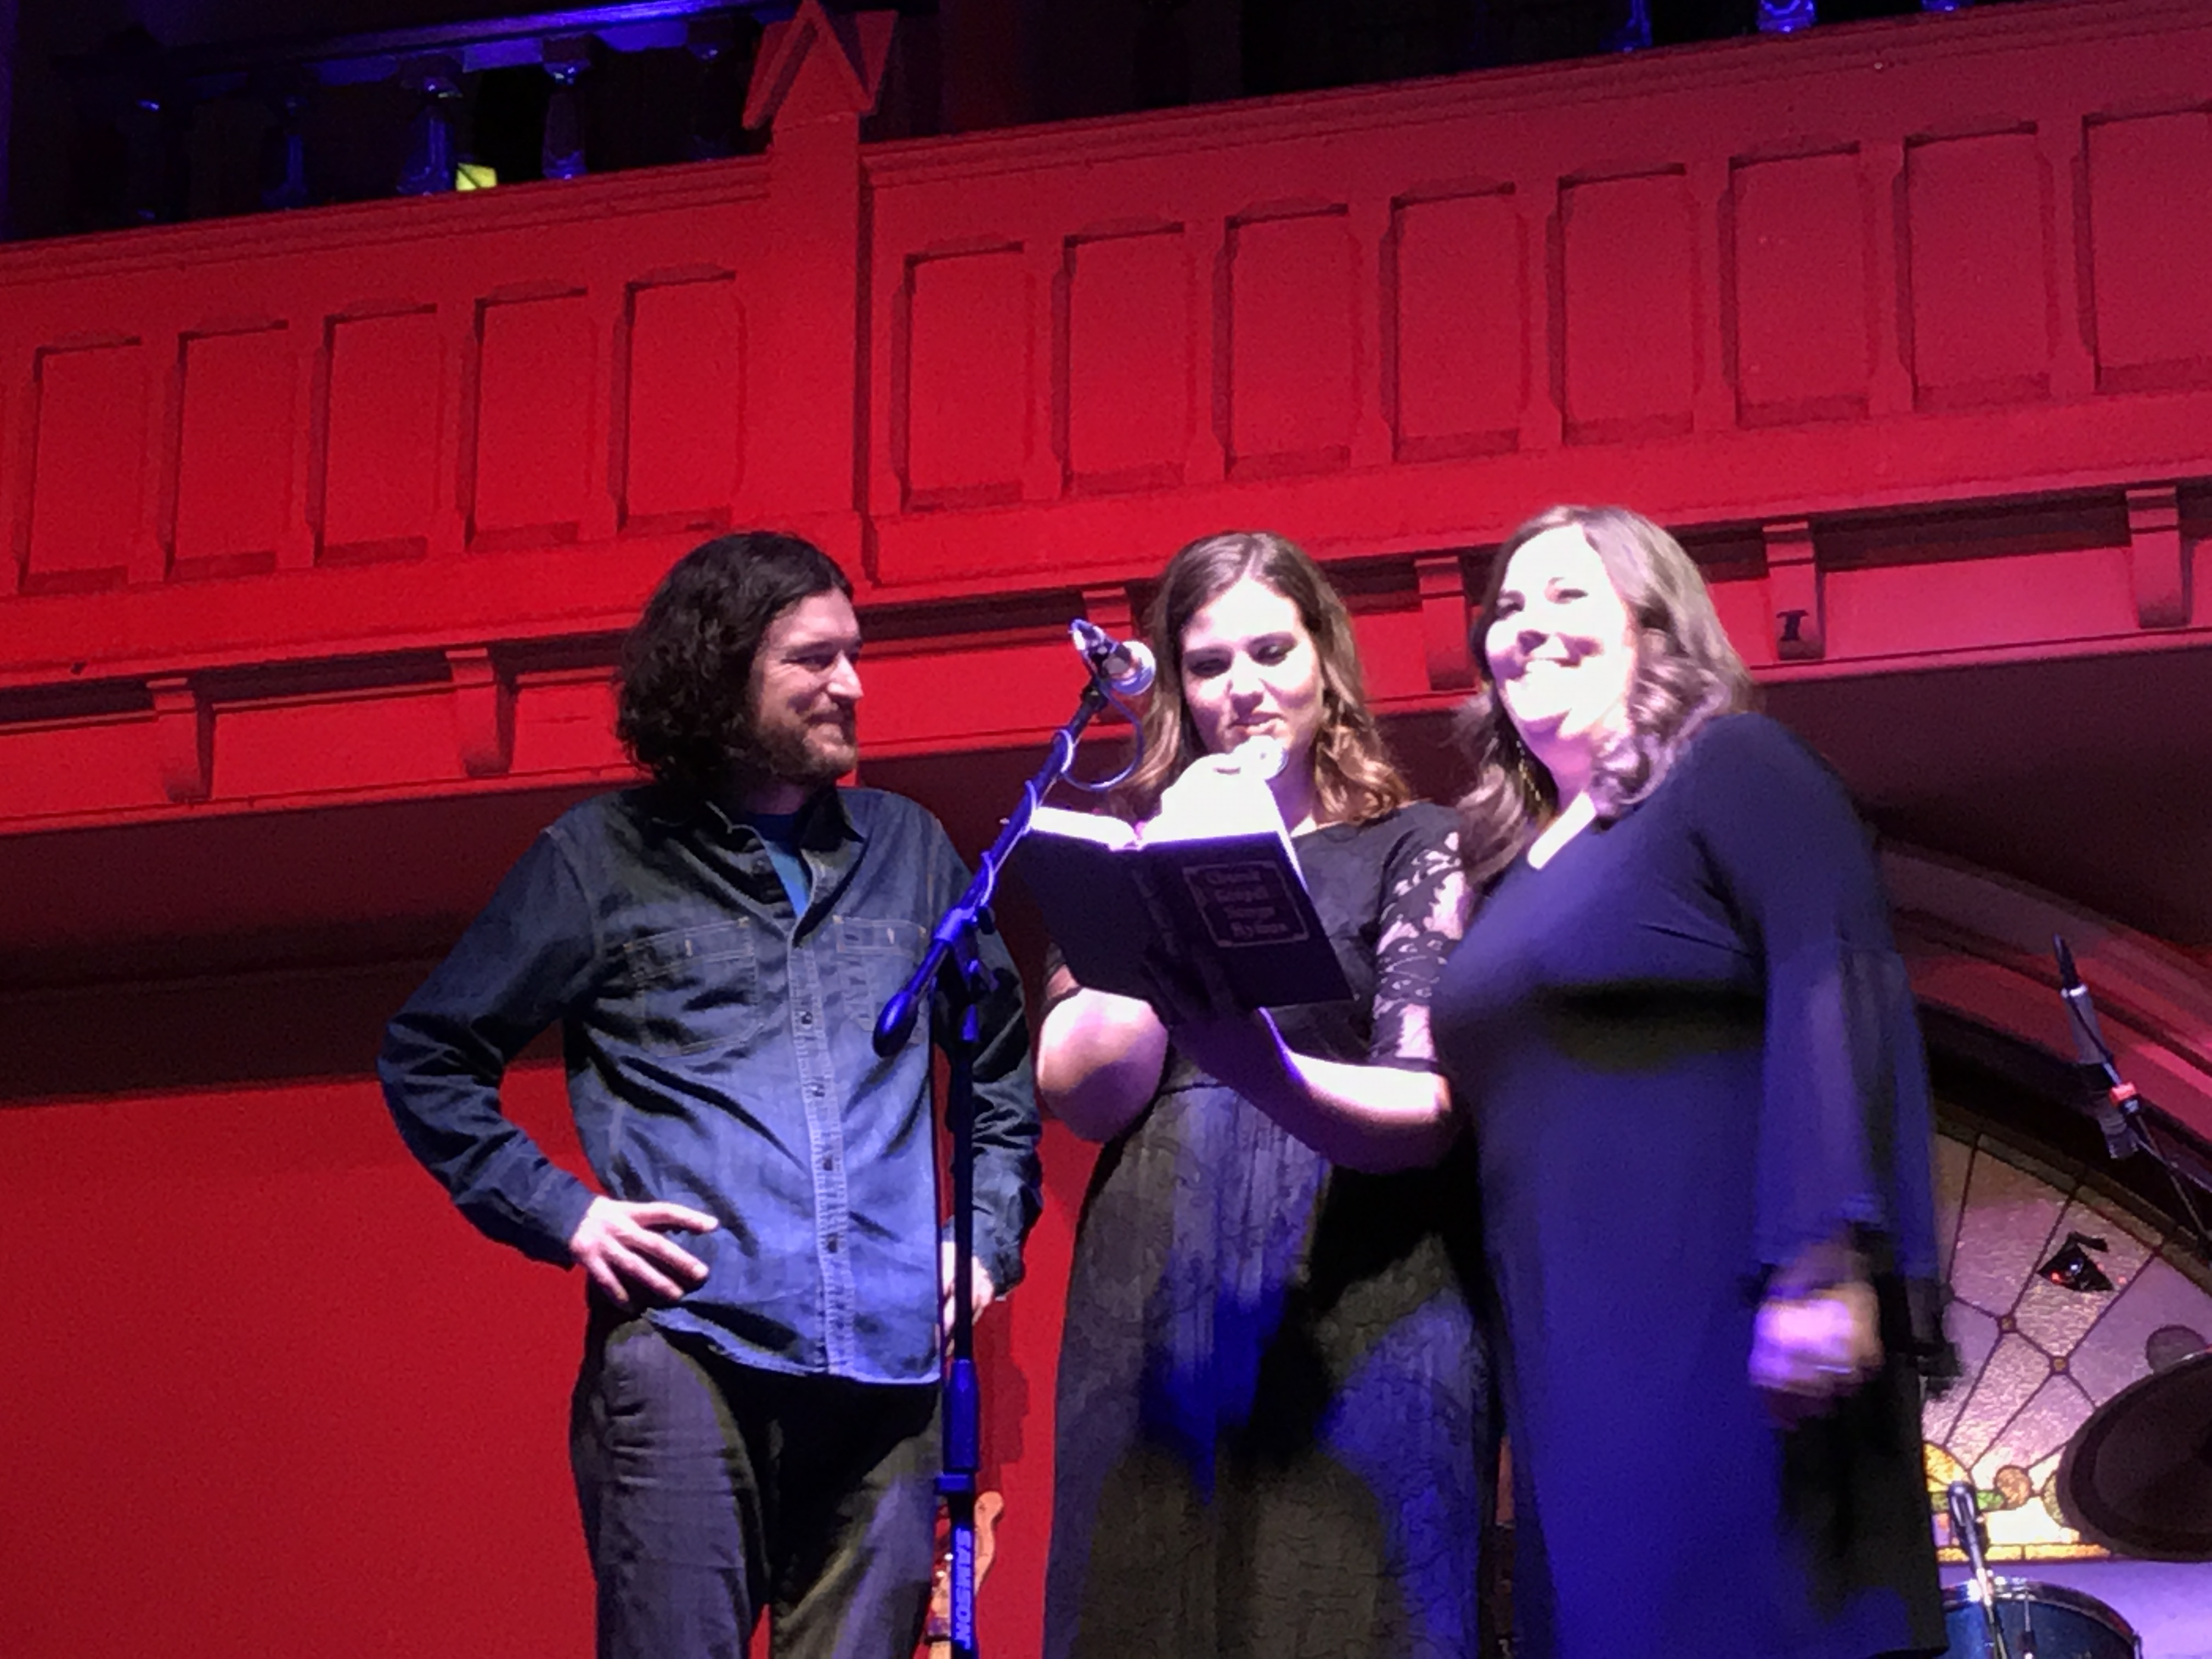 Cheyenne Medders (left), Lydia Rogers (middle), and Laura Rogers (right) singing a cappella harmonies at the conclusion of the show.  Photo taken by and the property of FourWalls.